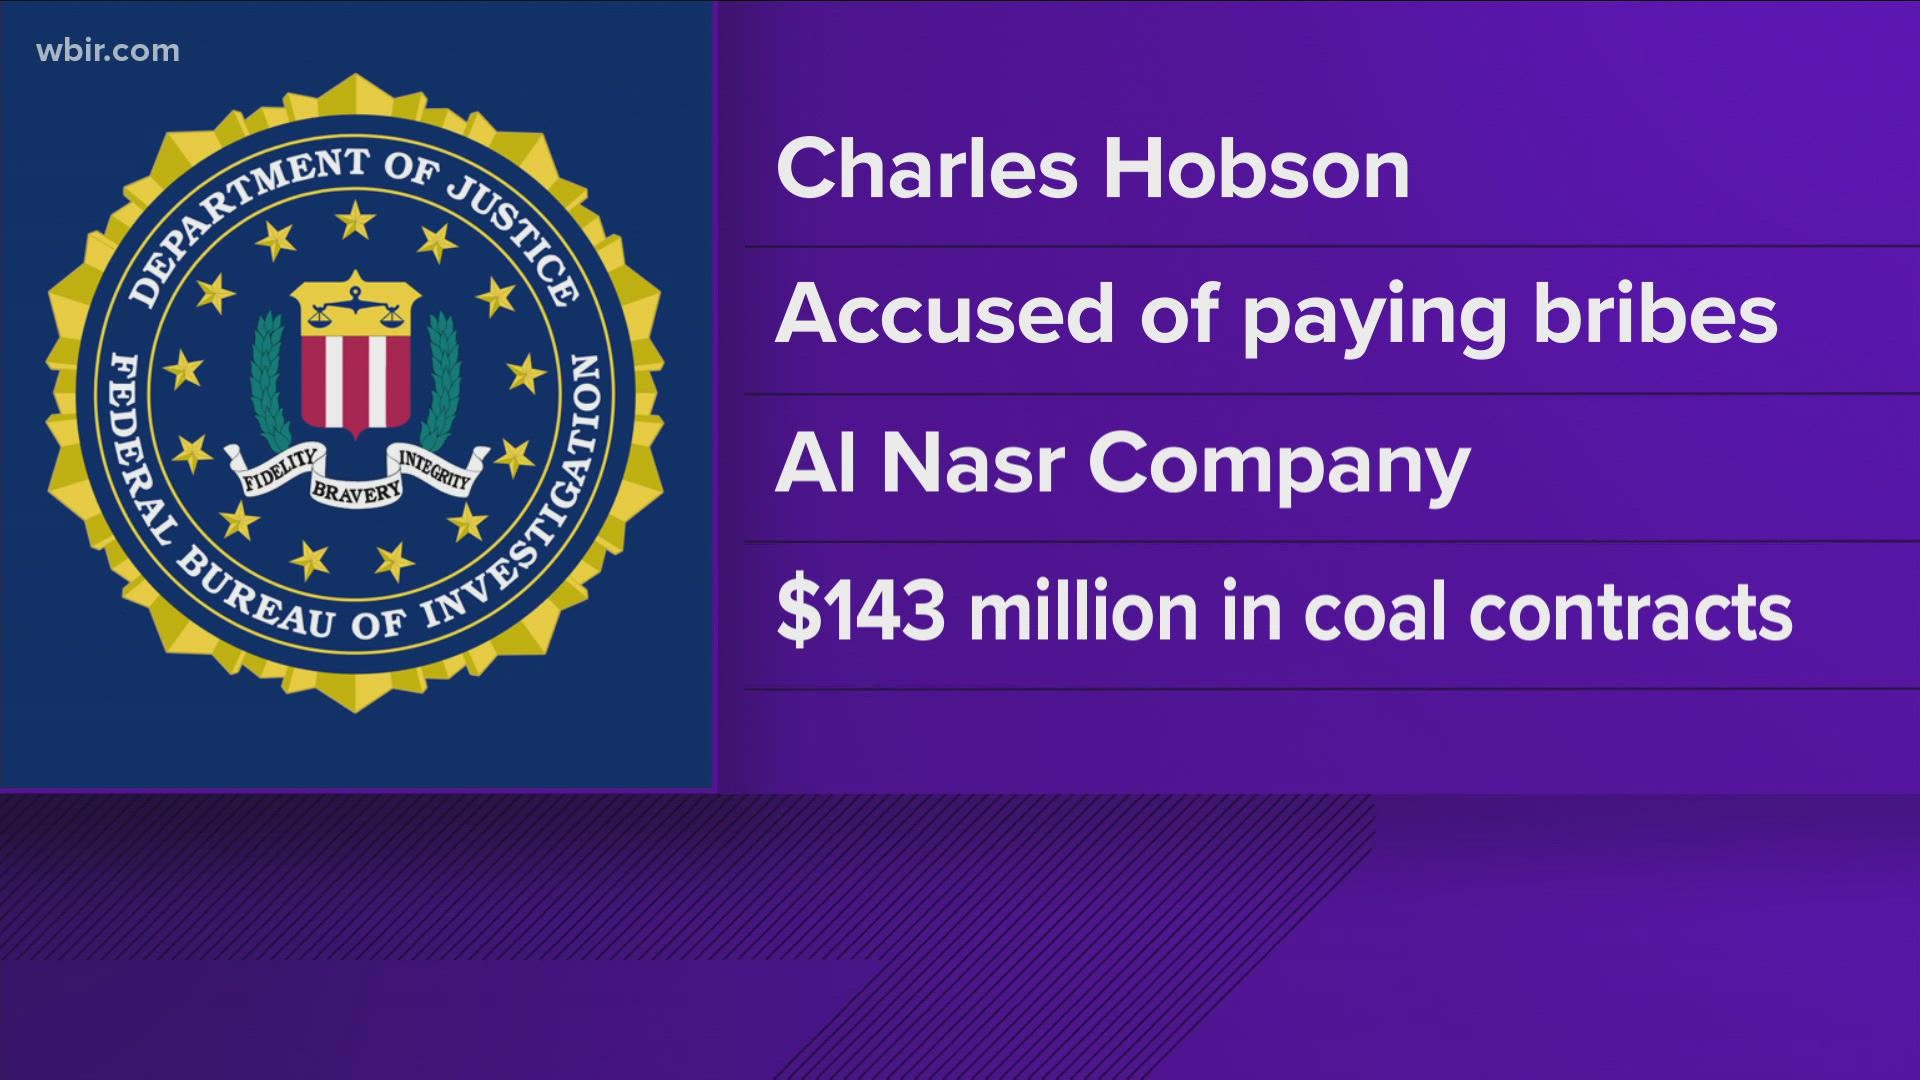 Charles Hobson is accused of bribing government officials in Egypt $143 million in coal contracts.